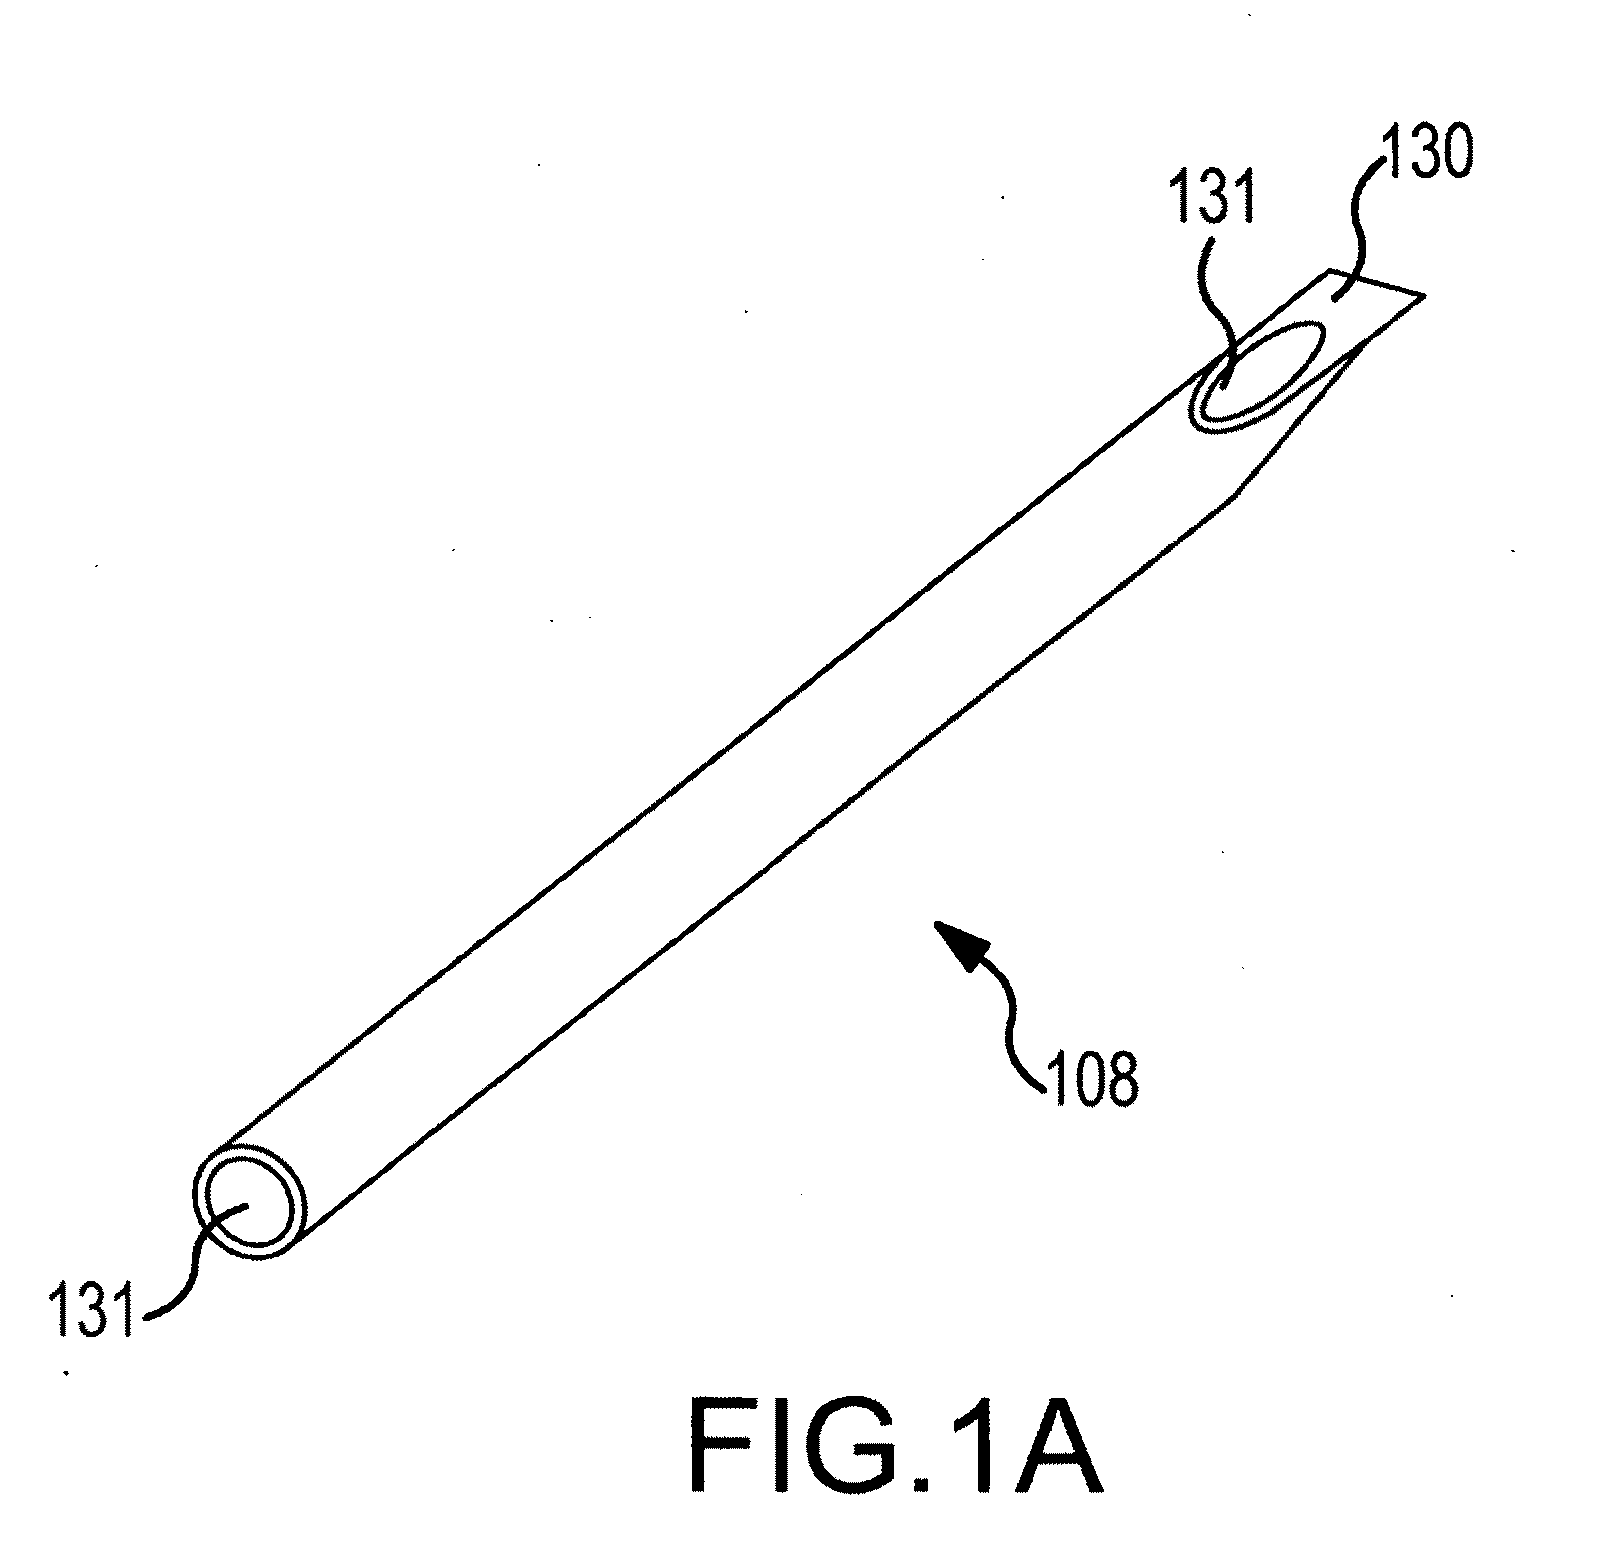 Vertebral joint implants and delivery tools